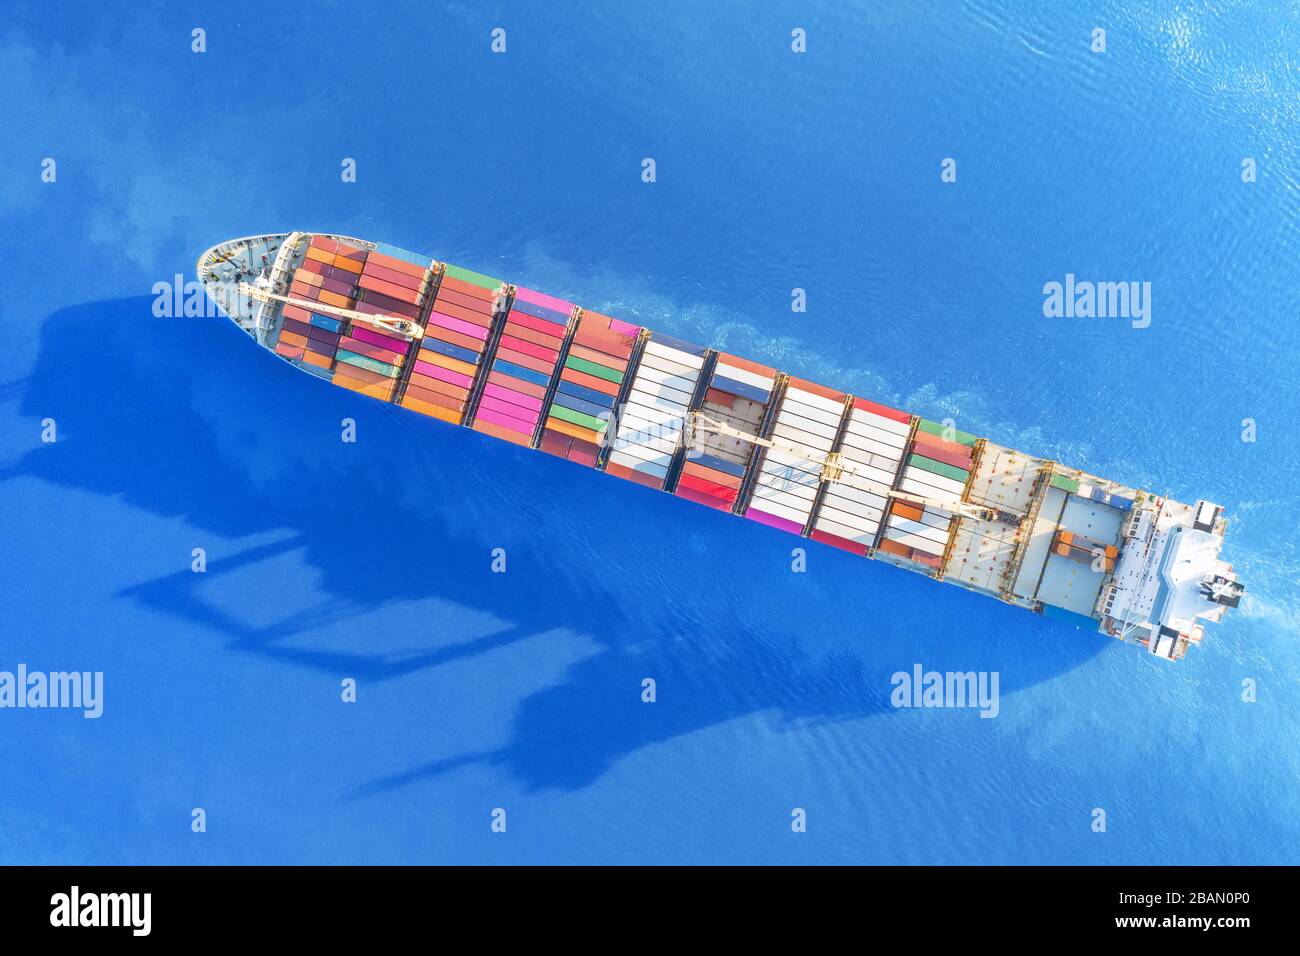 Large full loaded container ship sailing bright blue sea. Top aerial view Stock Photo